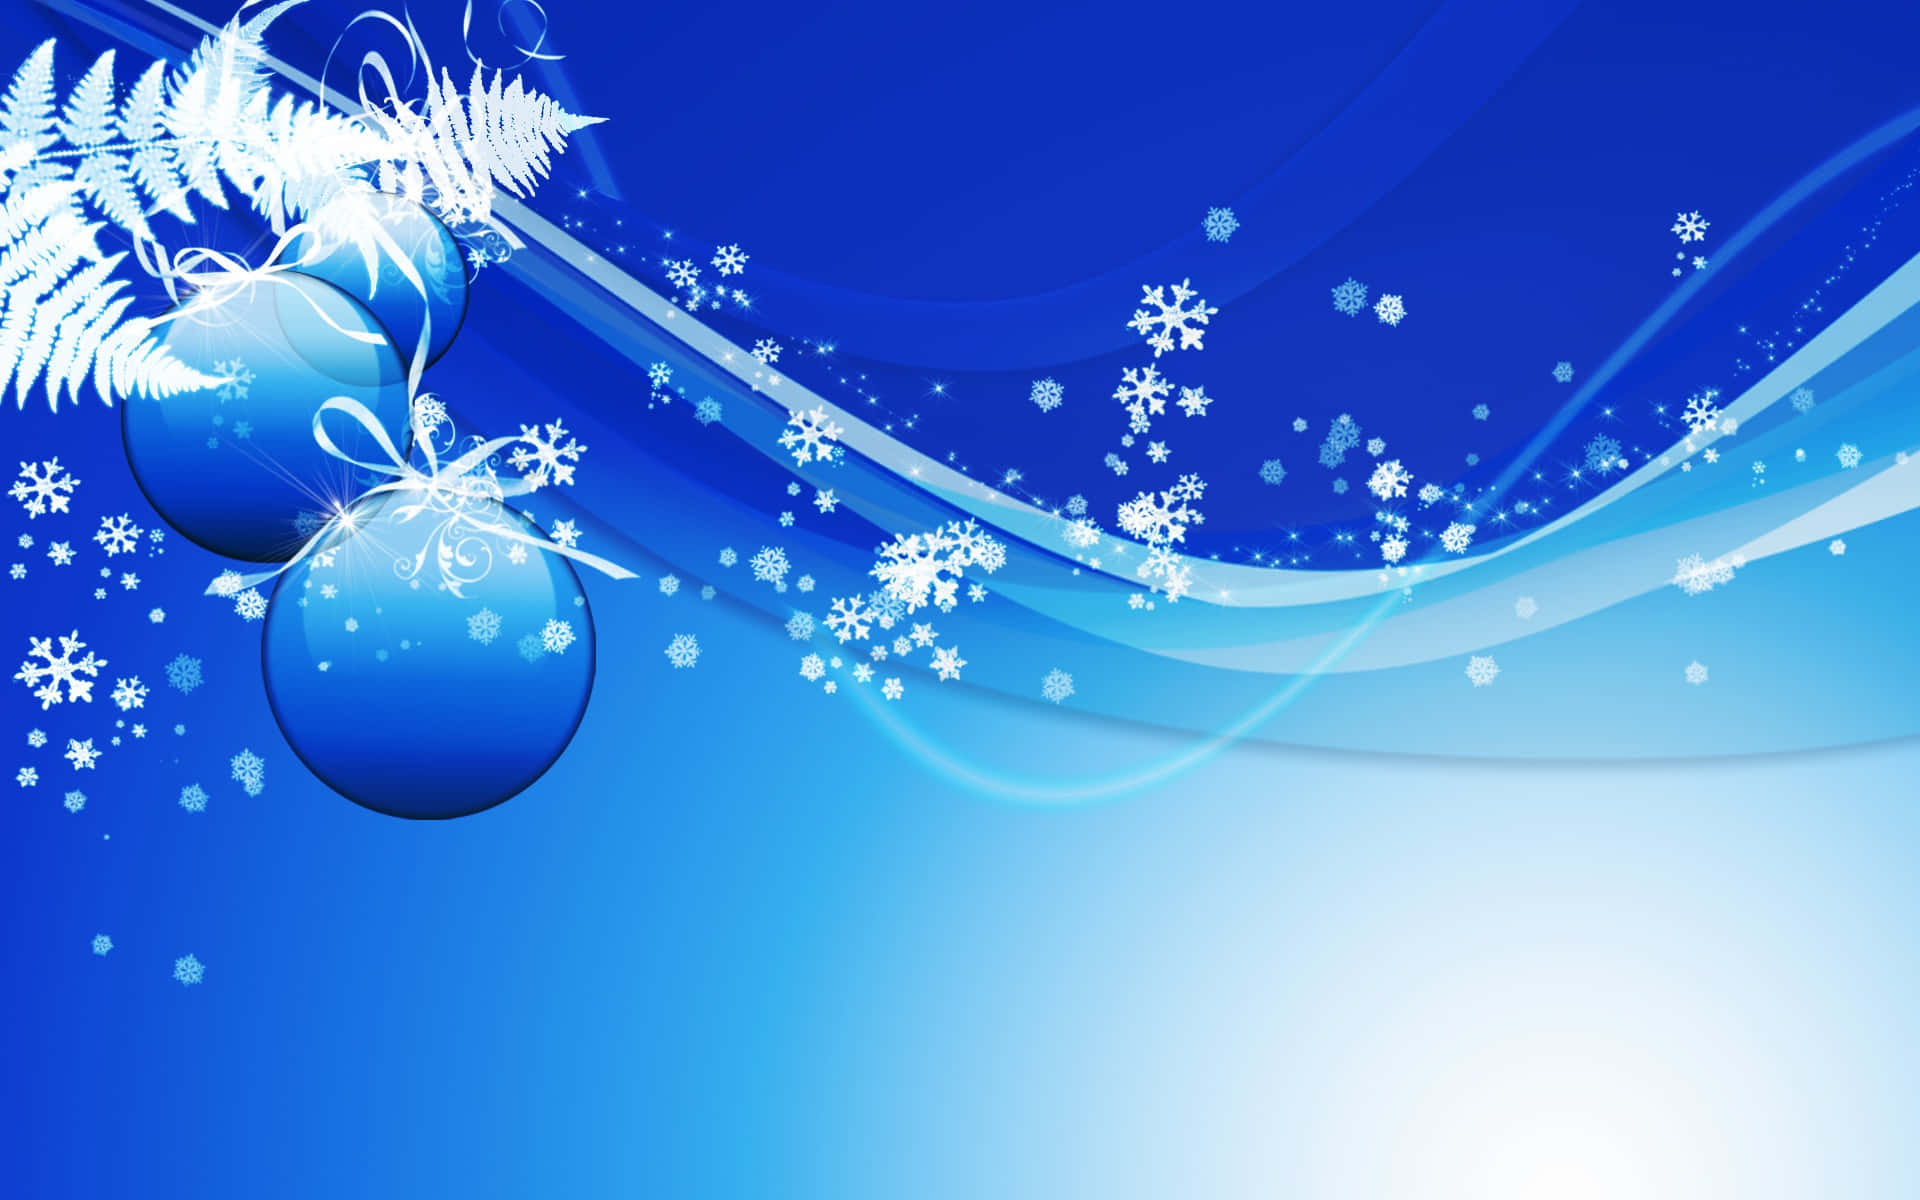 Add a touch of blue to your holiday celebrations with this festive Blue Christmas background